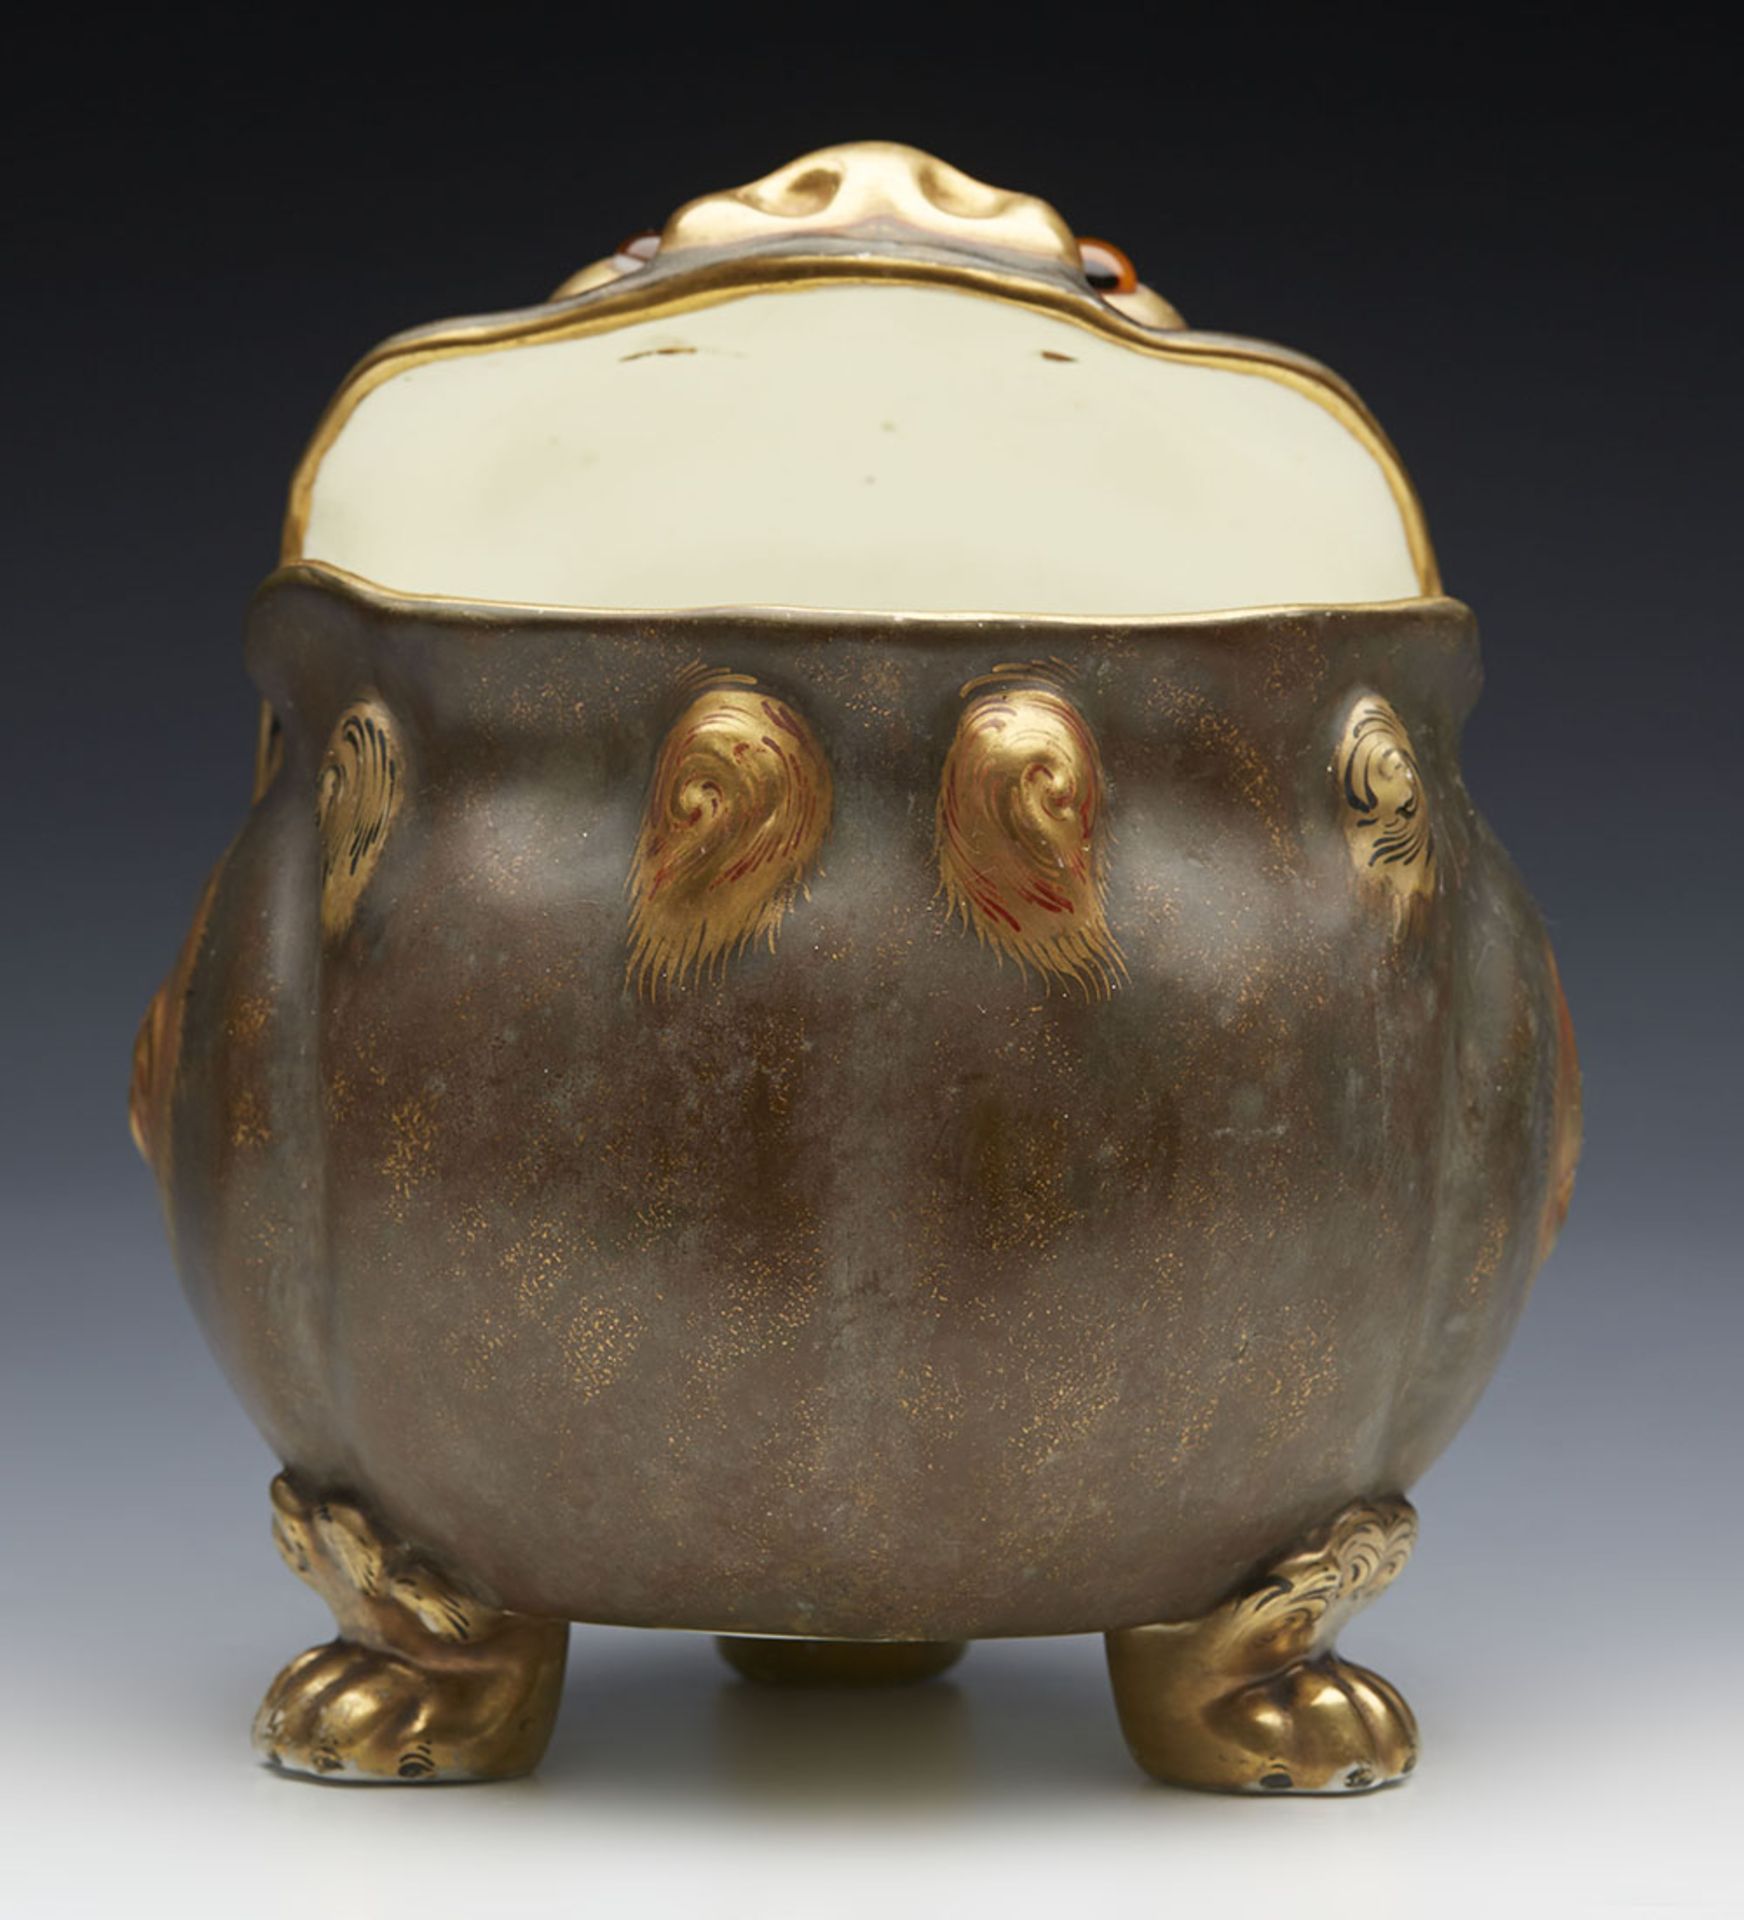 ANTIQUE MOORE BROTHERS GROTESQUE BRONZED FROG VASE C.1880 - Image 2 of 10